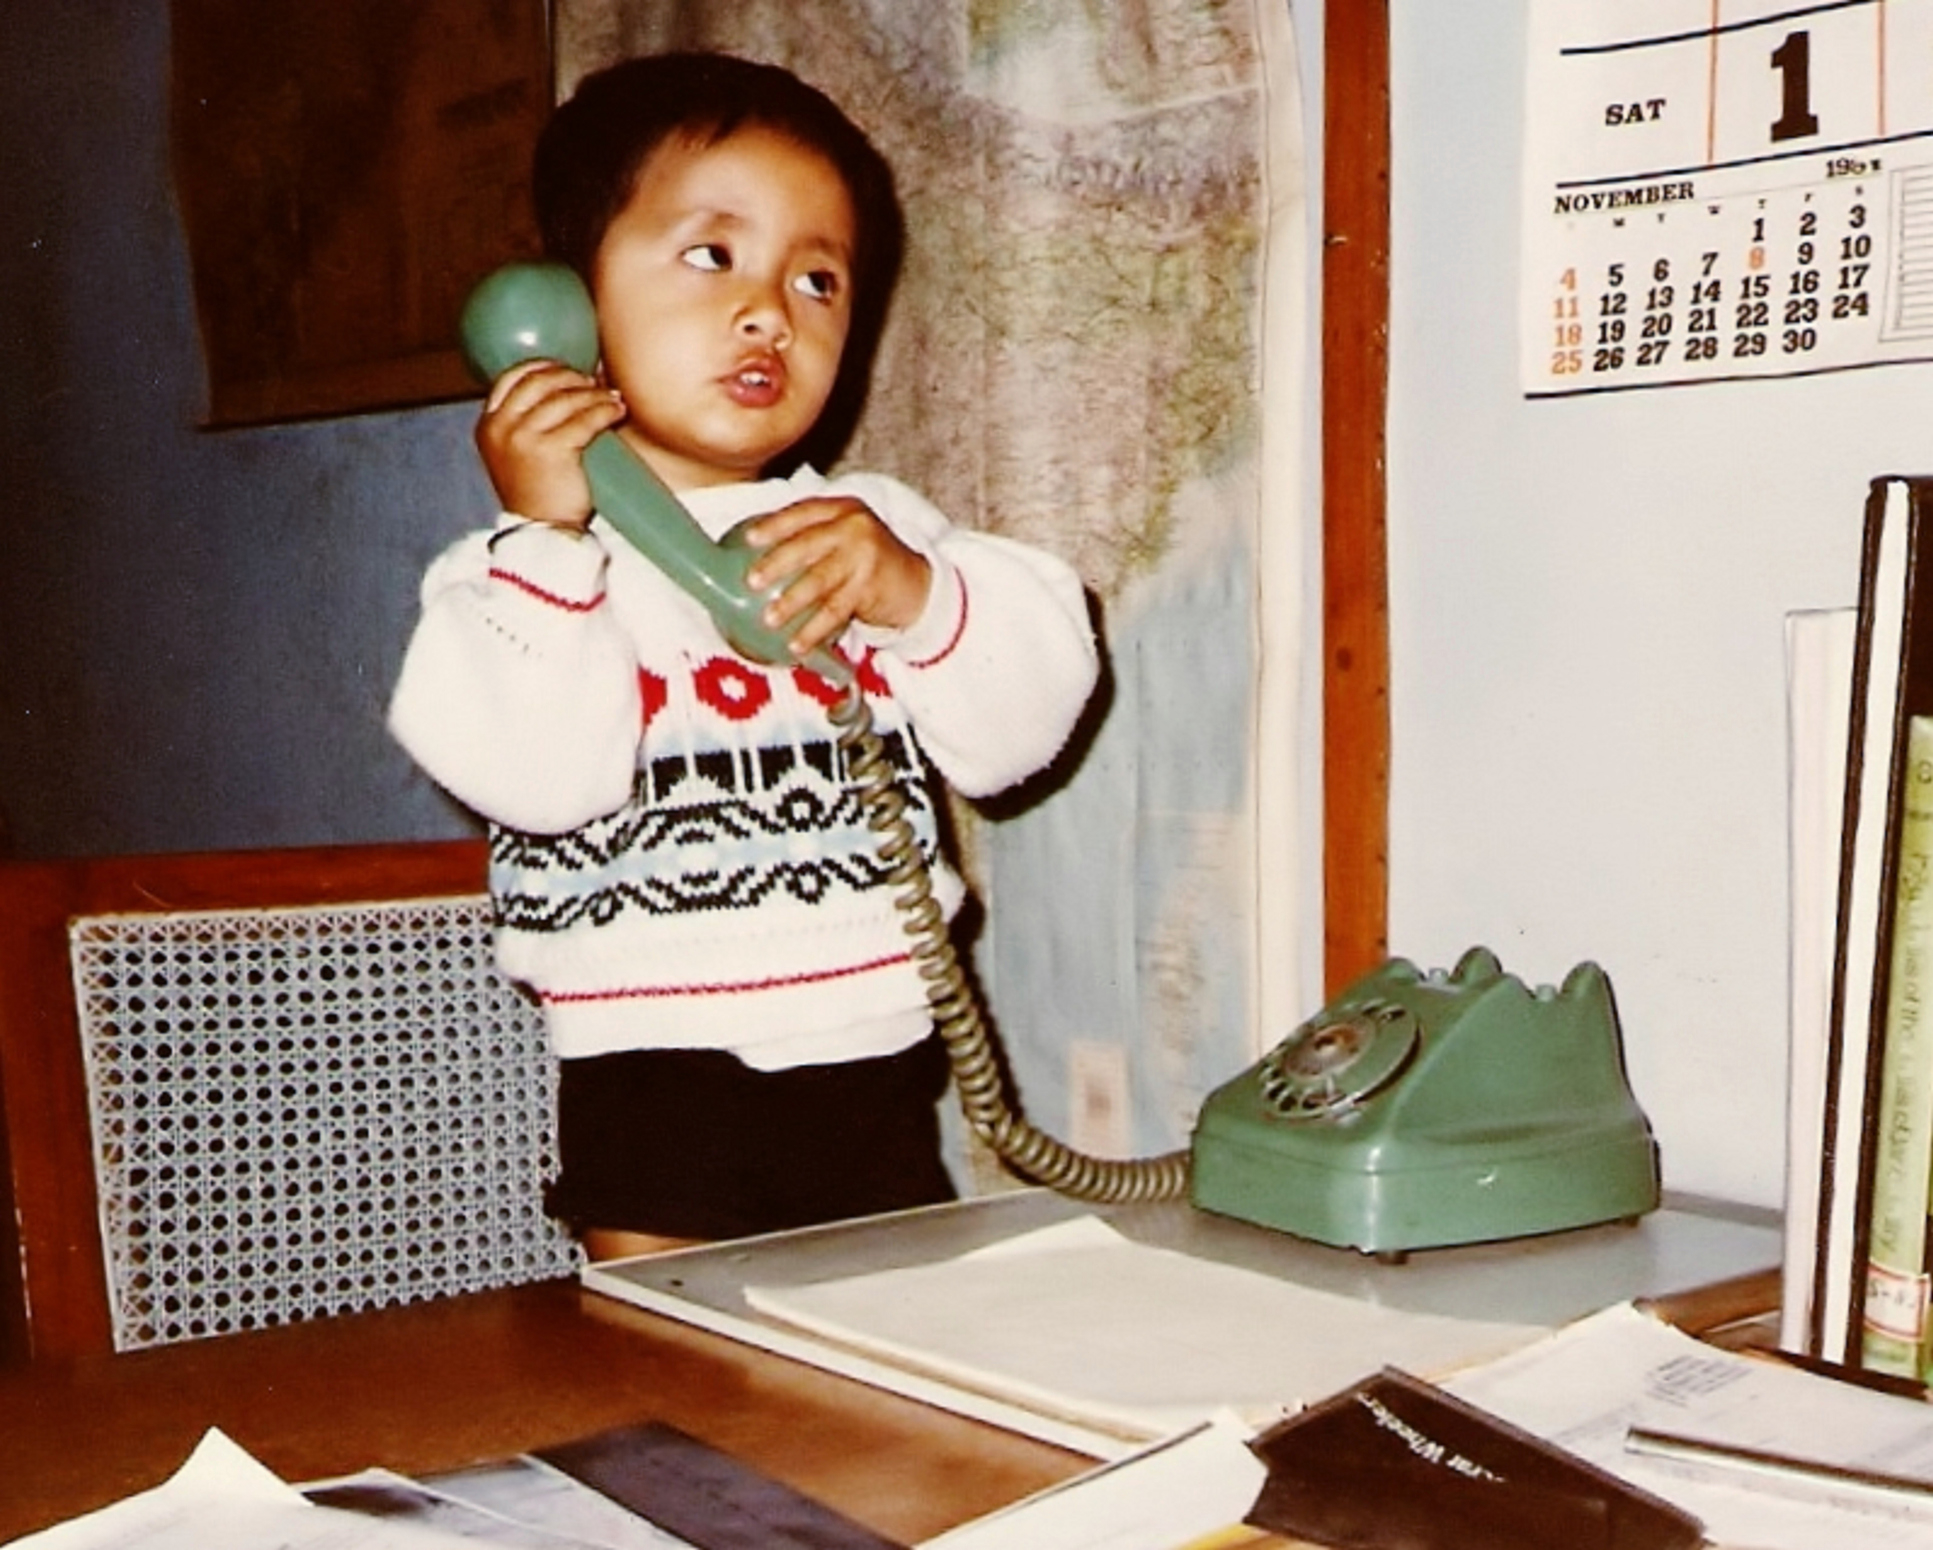 Young child holding a phone receiver to their ear, standing at a desk with papers, a rotary dial phone, and a wall calendar in the background